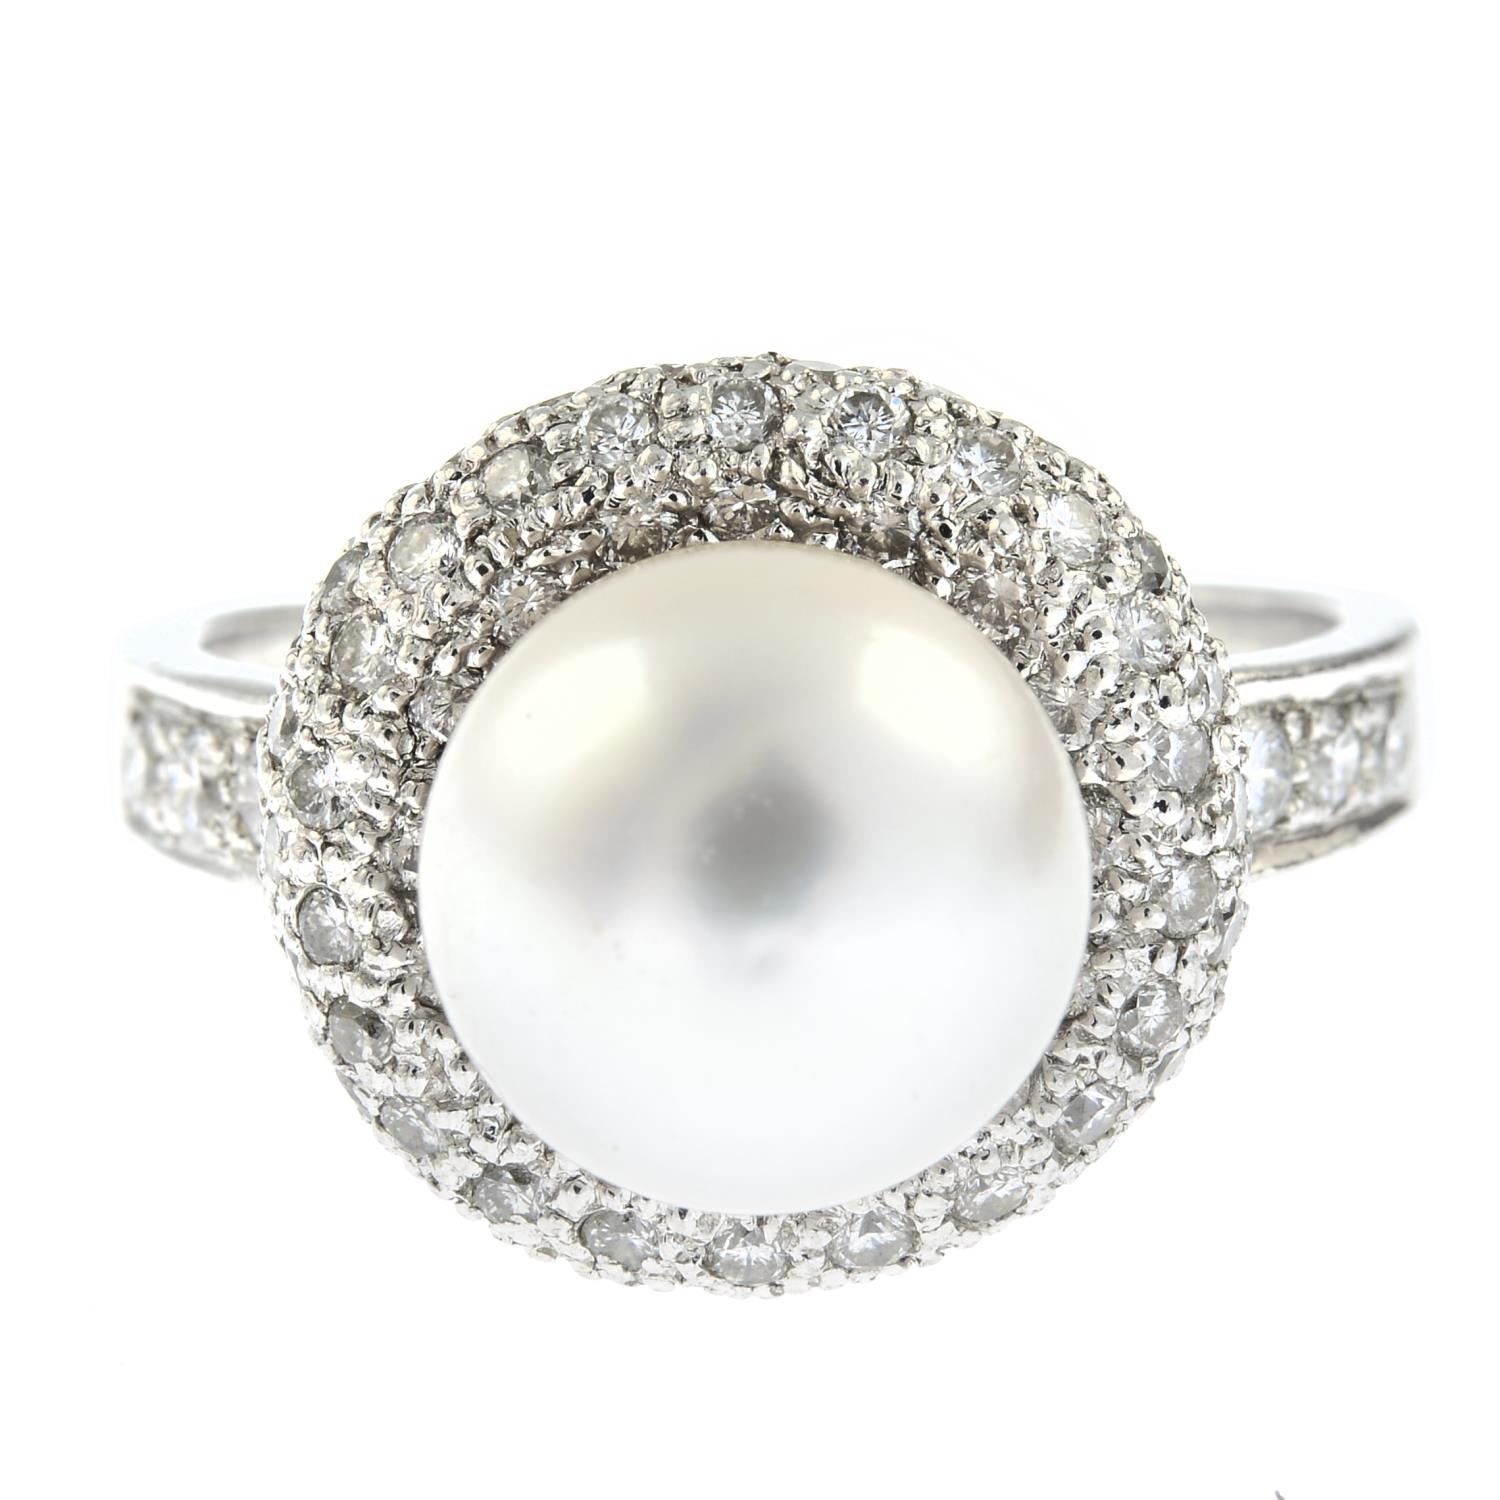 A platinum cultured pearl and pave-set diamond cocktail ring.Estimated total diamond weight